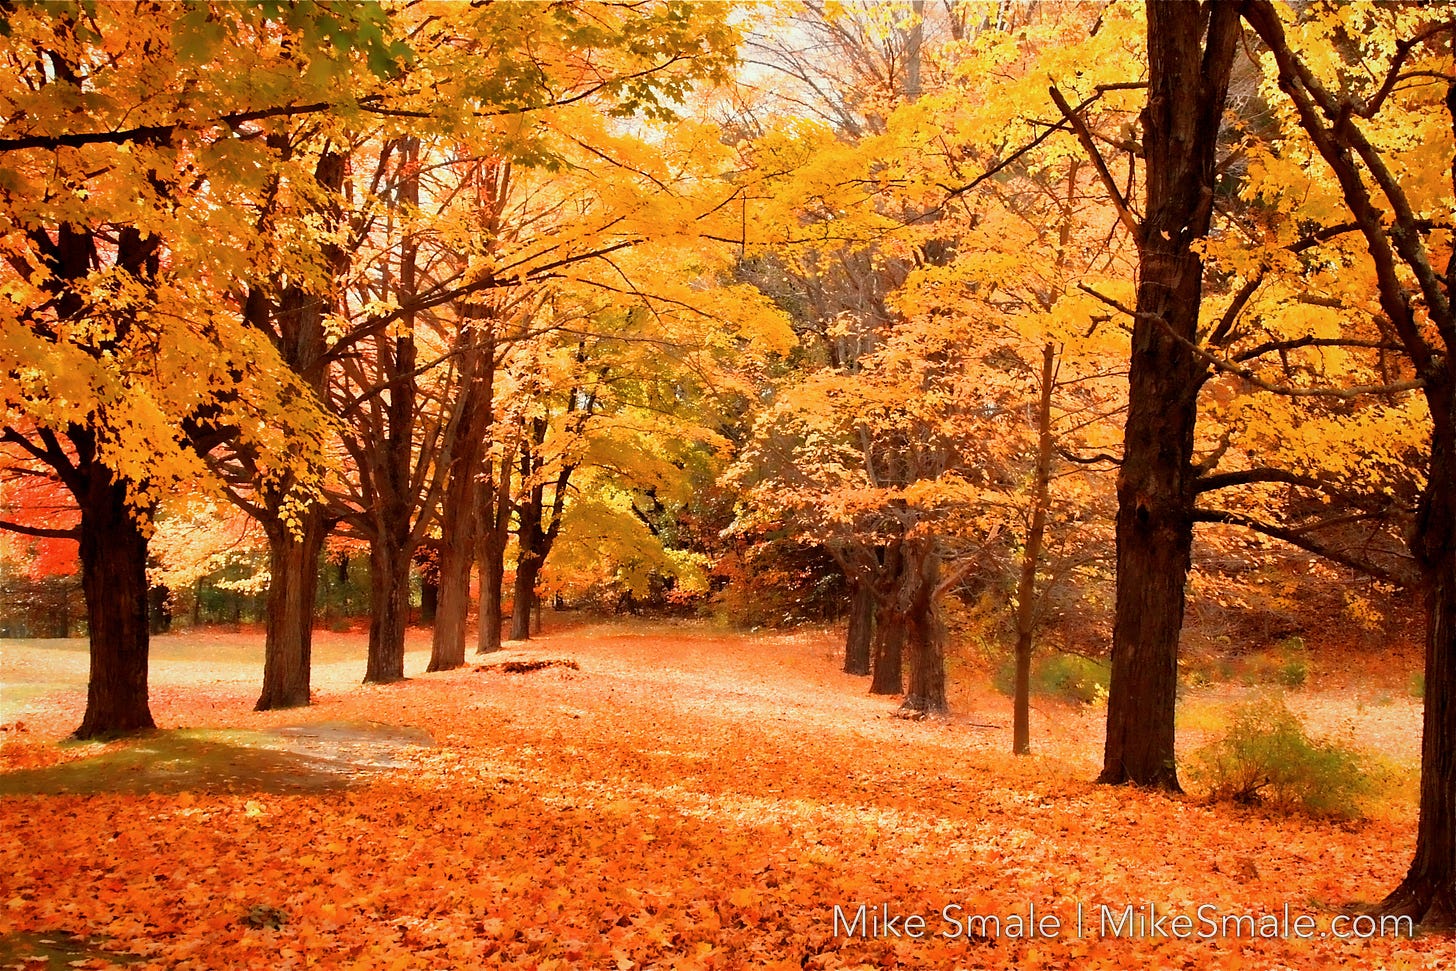 Two parallel rows of deciduous trees emblazoned in orange and yellow in autumn.